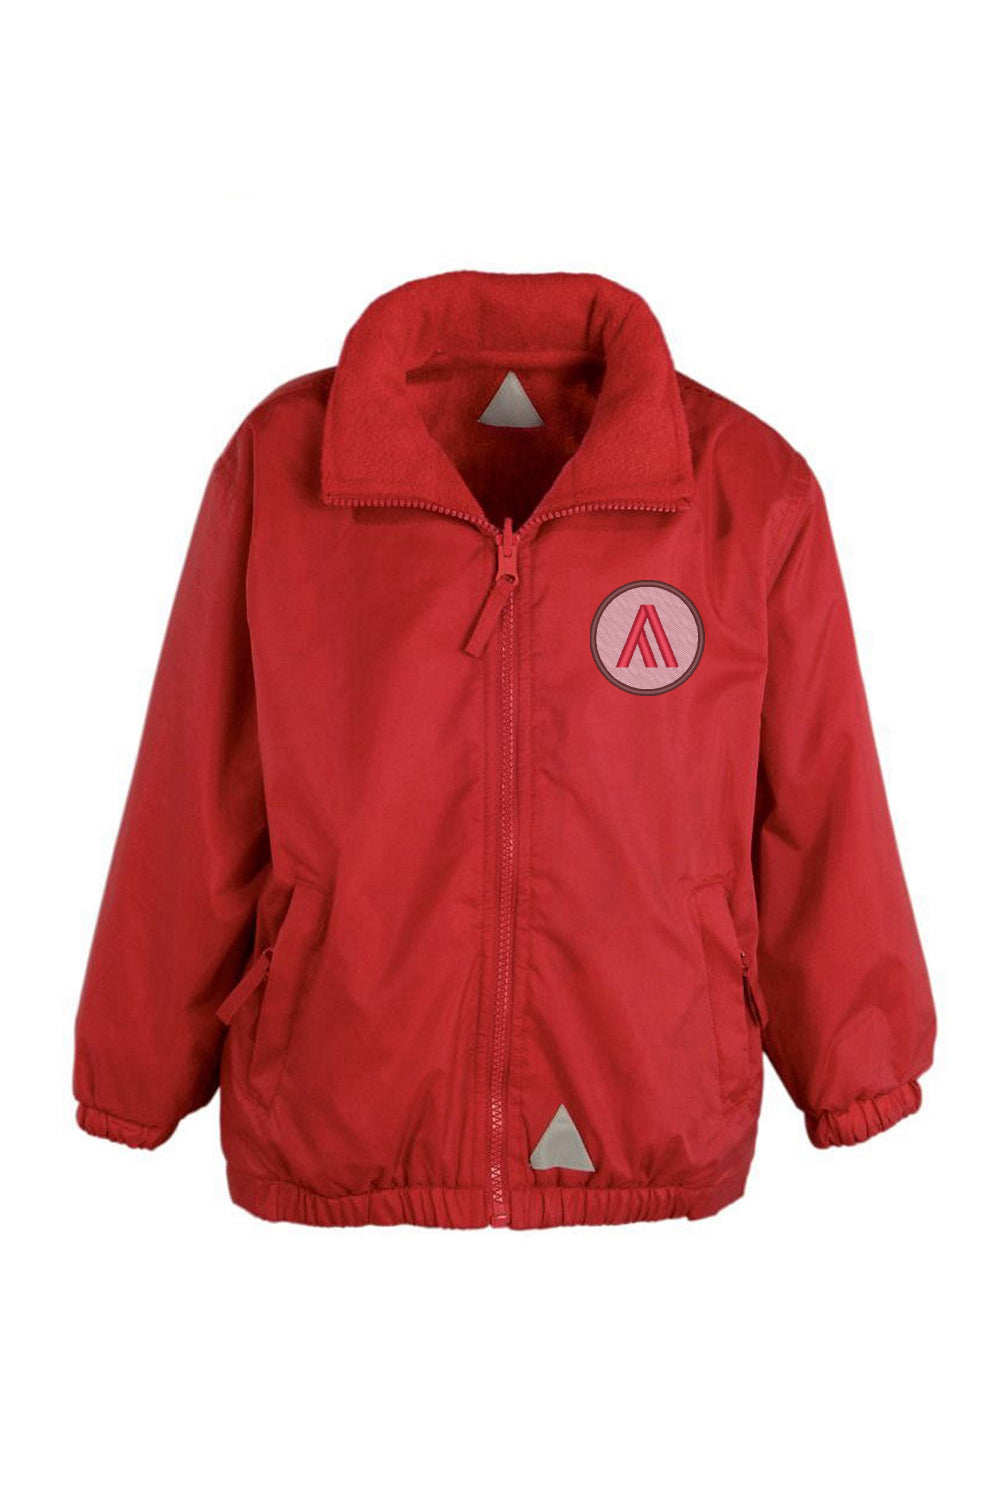 Abbey Federation Red Shower Jacket